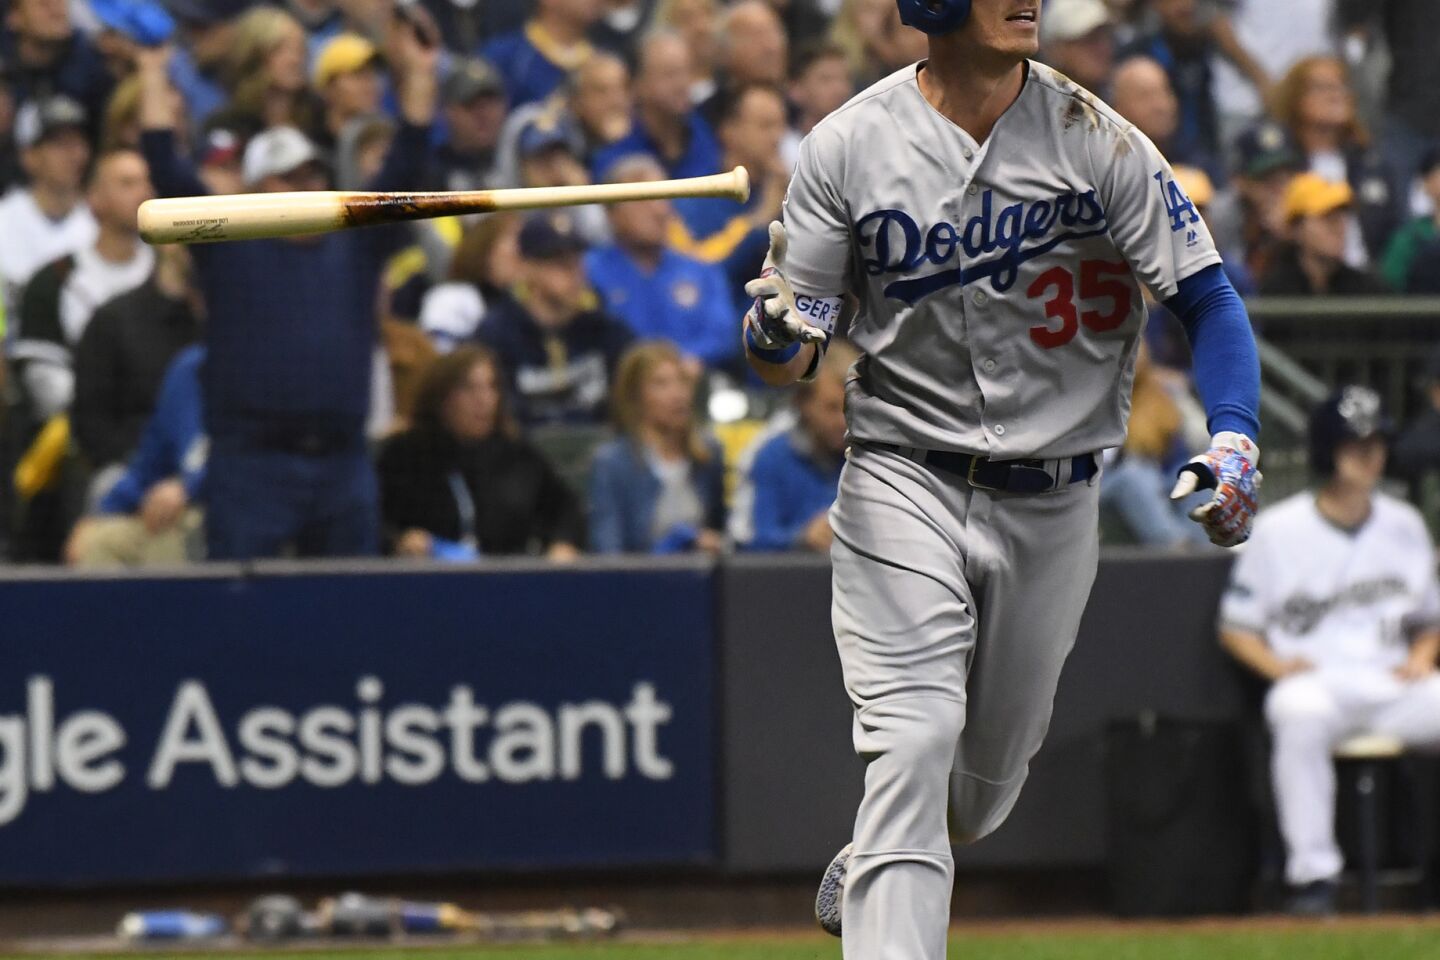 Dodgers Cody Bellinger tosses the bat after hitting a two run home run in the second inning.